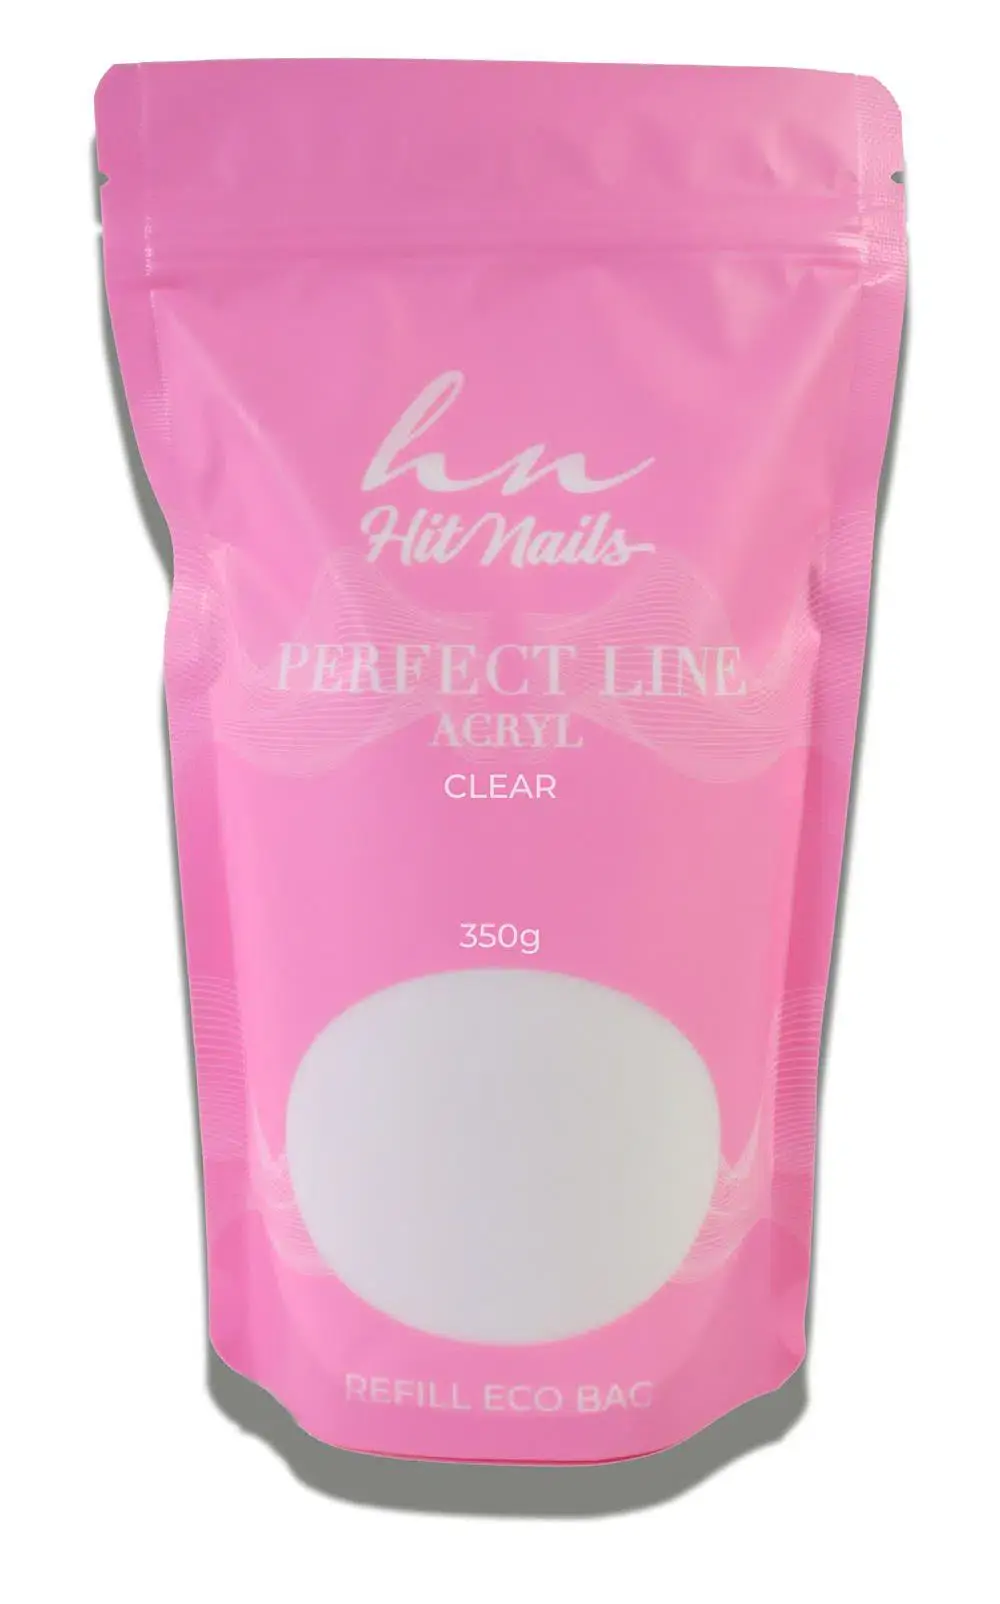 Perfect Line - Acryl - Clear 350g Refill